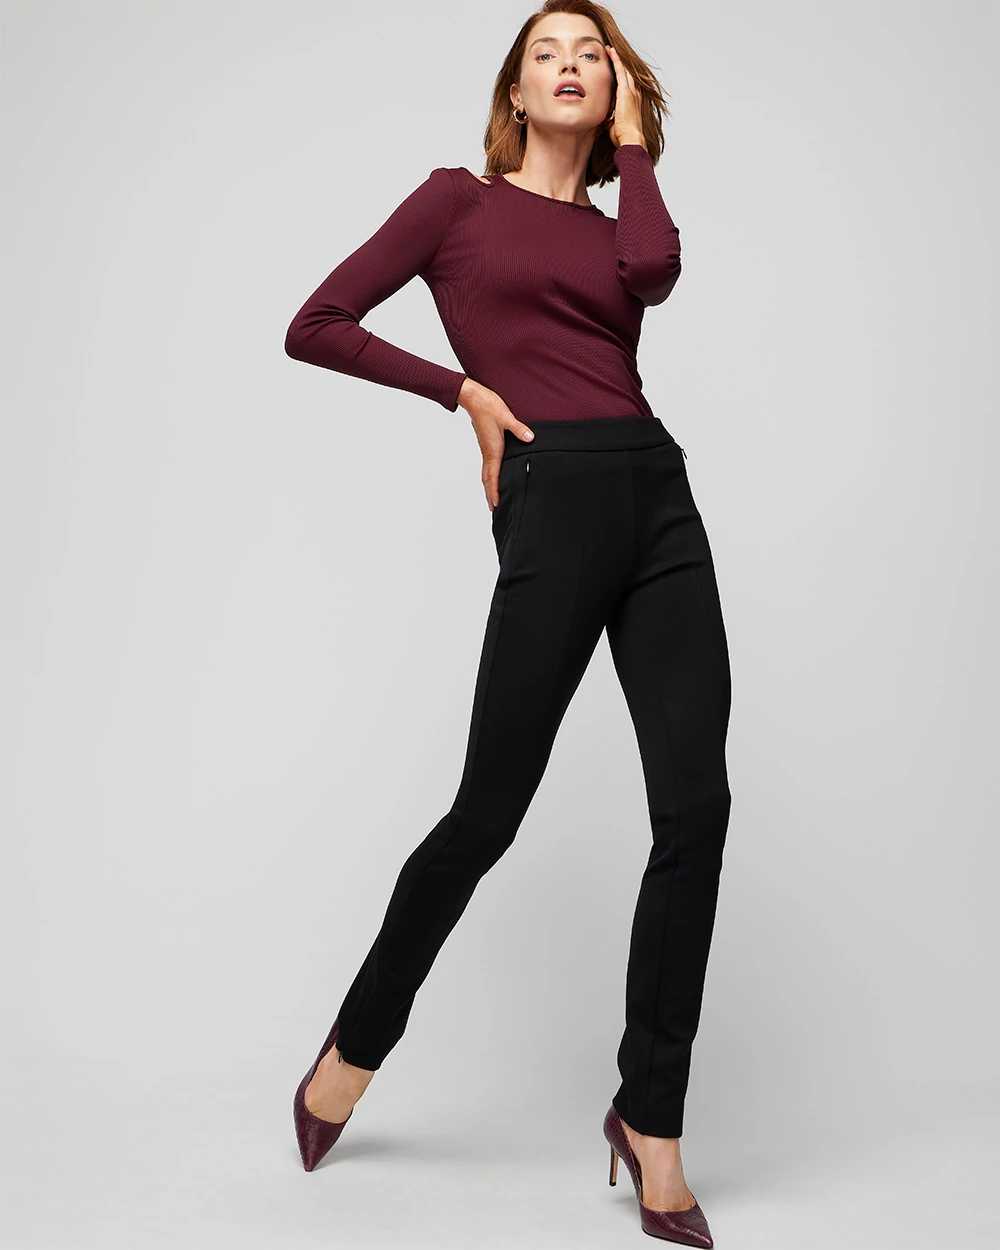 Petite Luxe Stretch Skinny Pant click to view larger image.